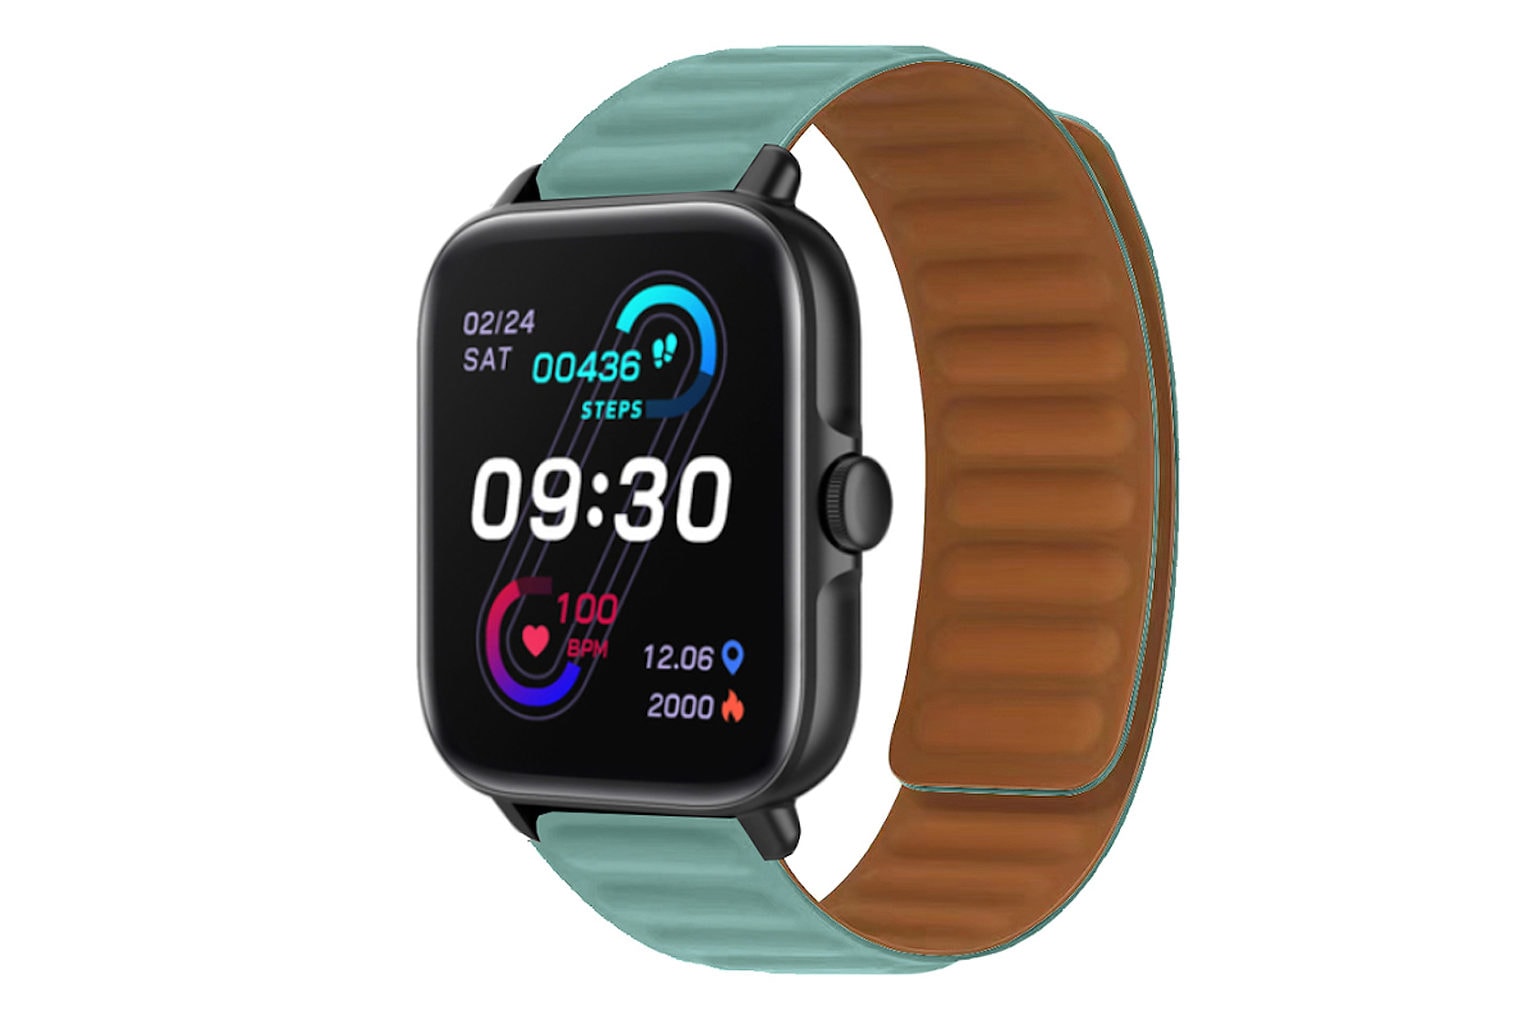 You're just in time to get this Apple Watch alternative for its early Black Friday Price.